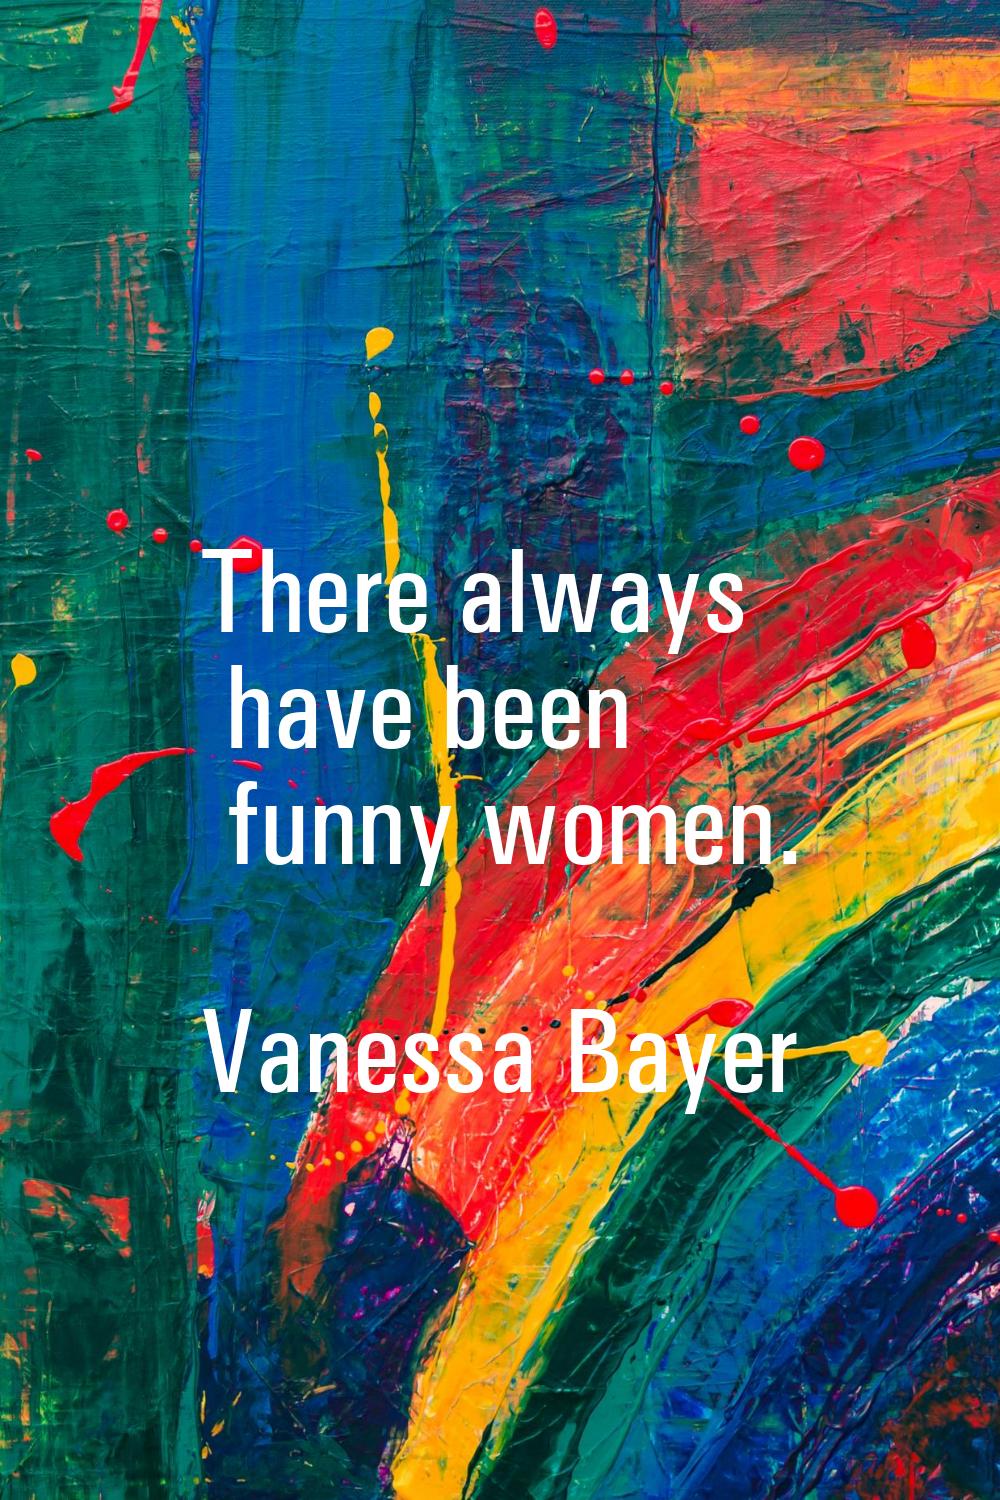 There always have been funny women.